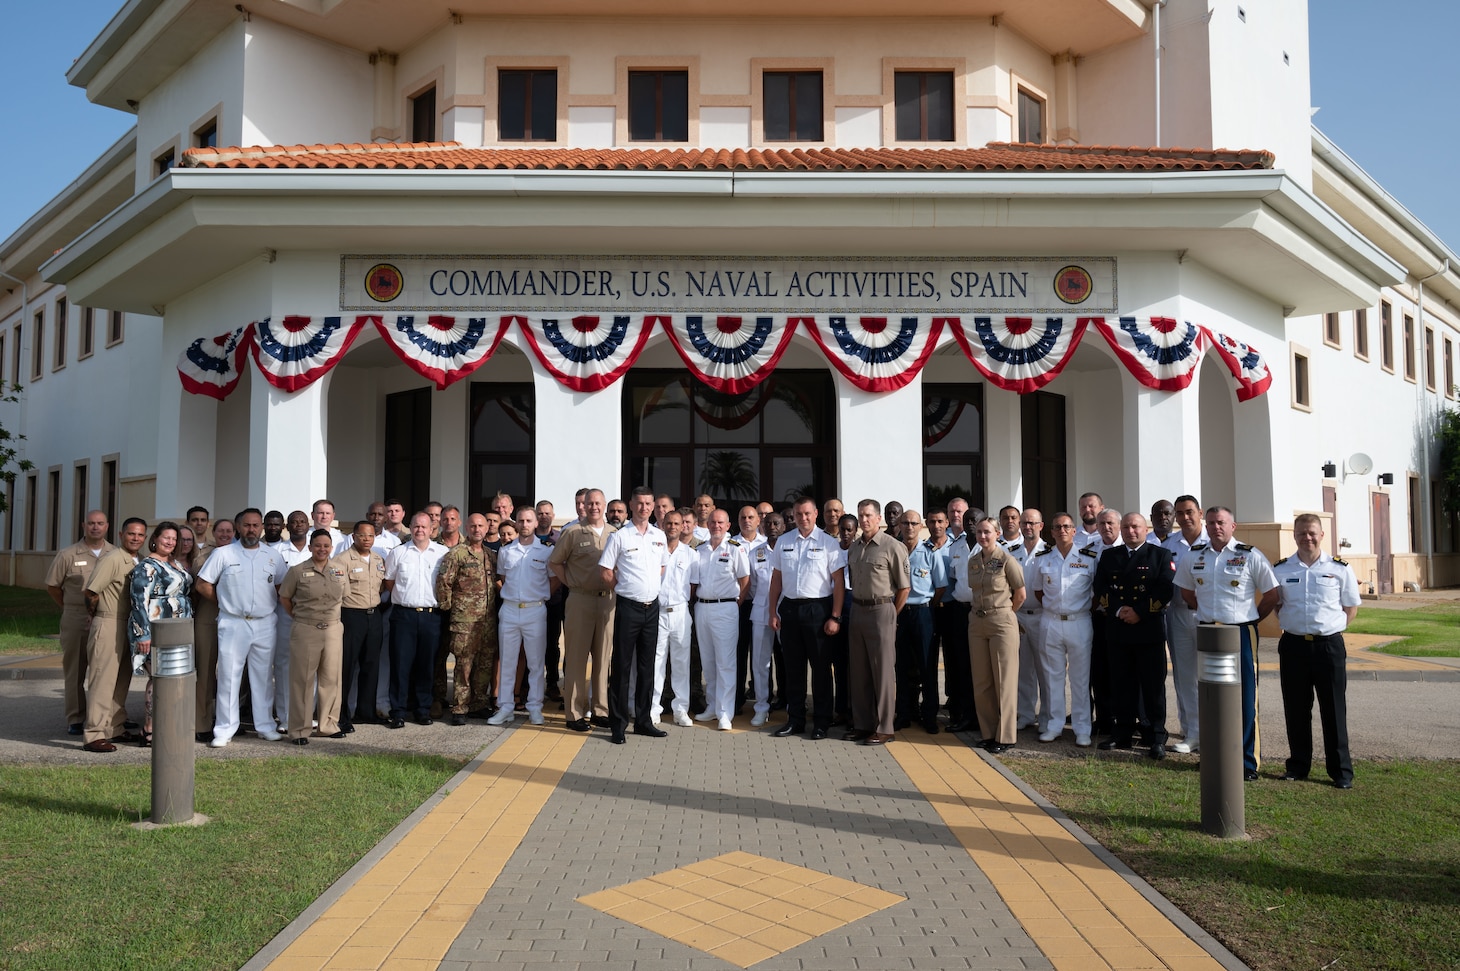 The Europe and Africa Senior Enlisted Leadership Symposium attendees pose for a group photo.